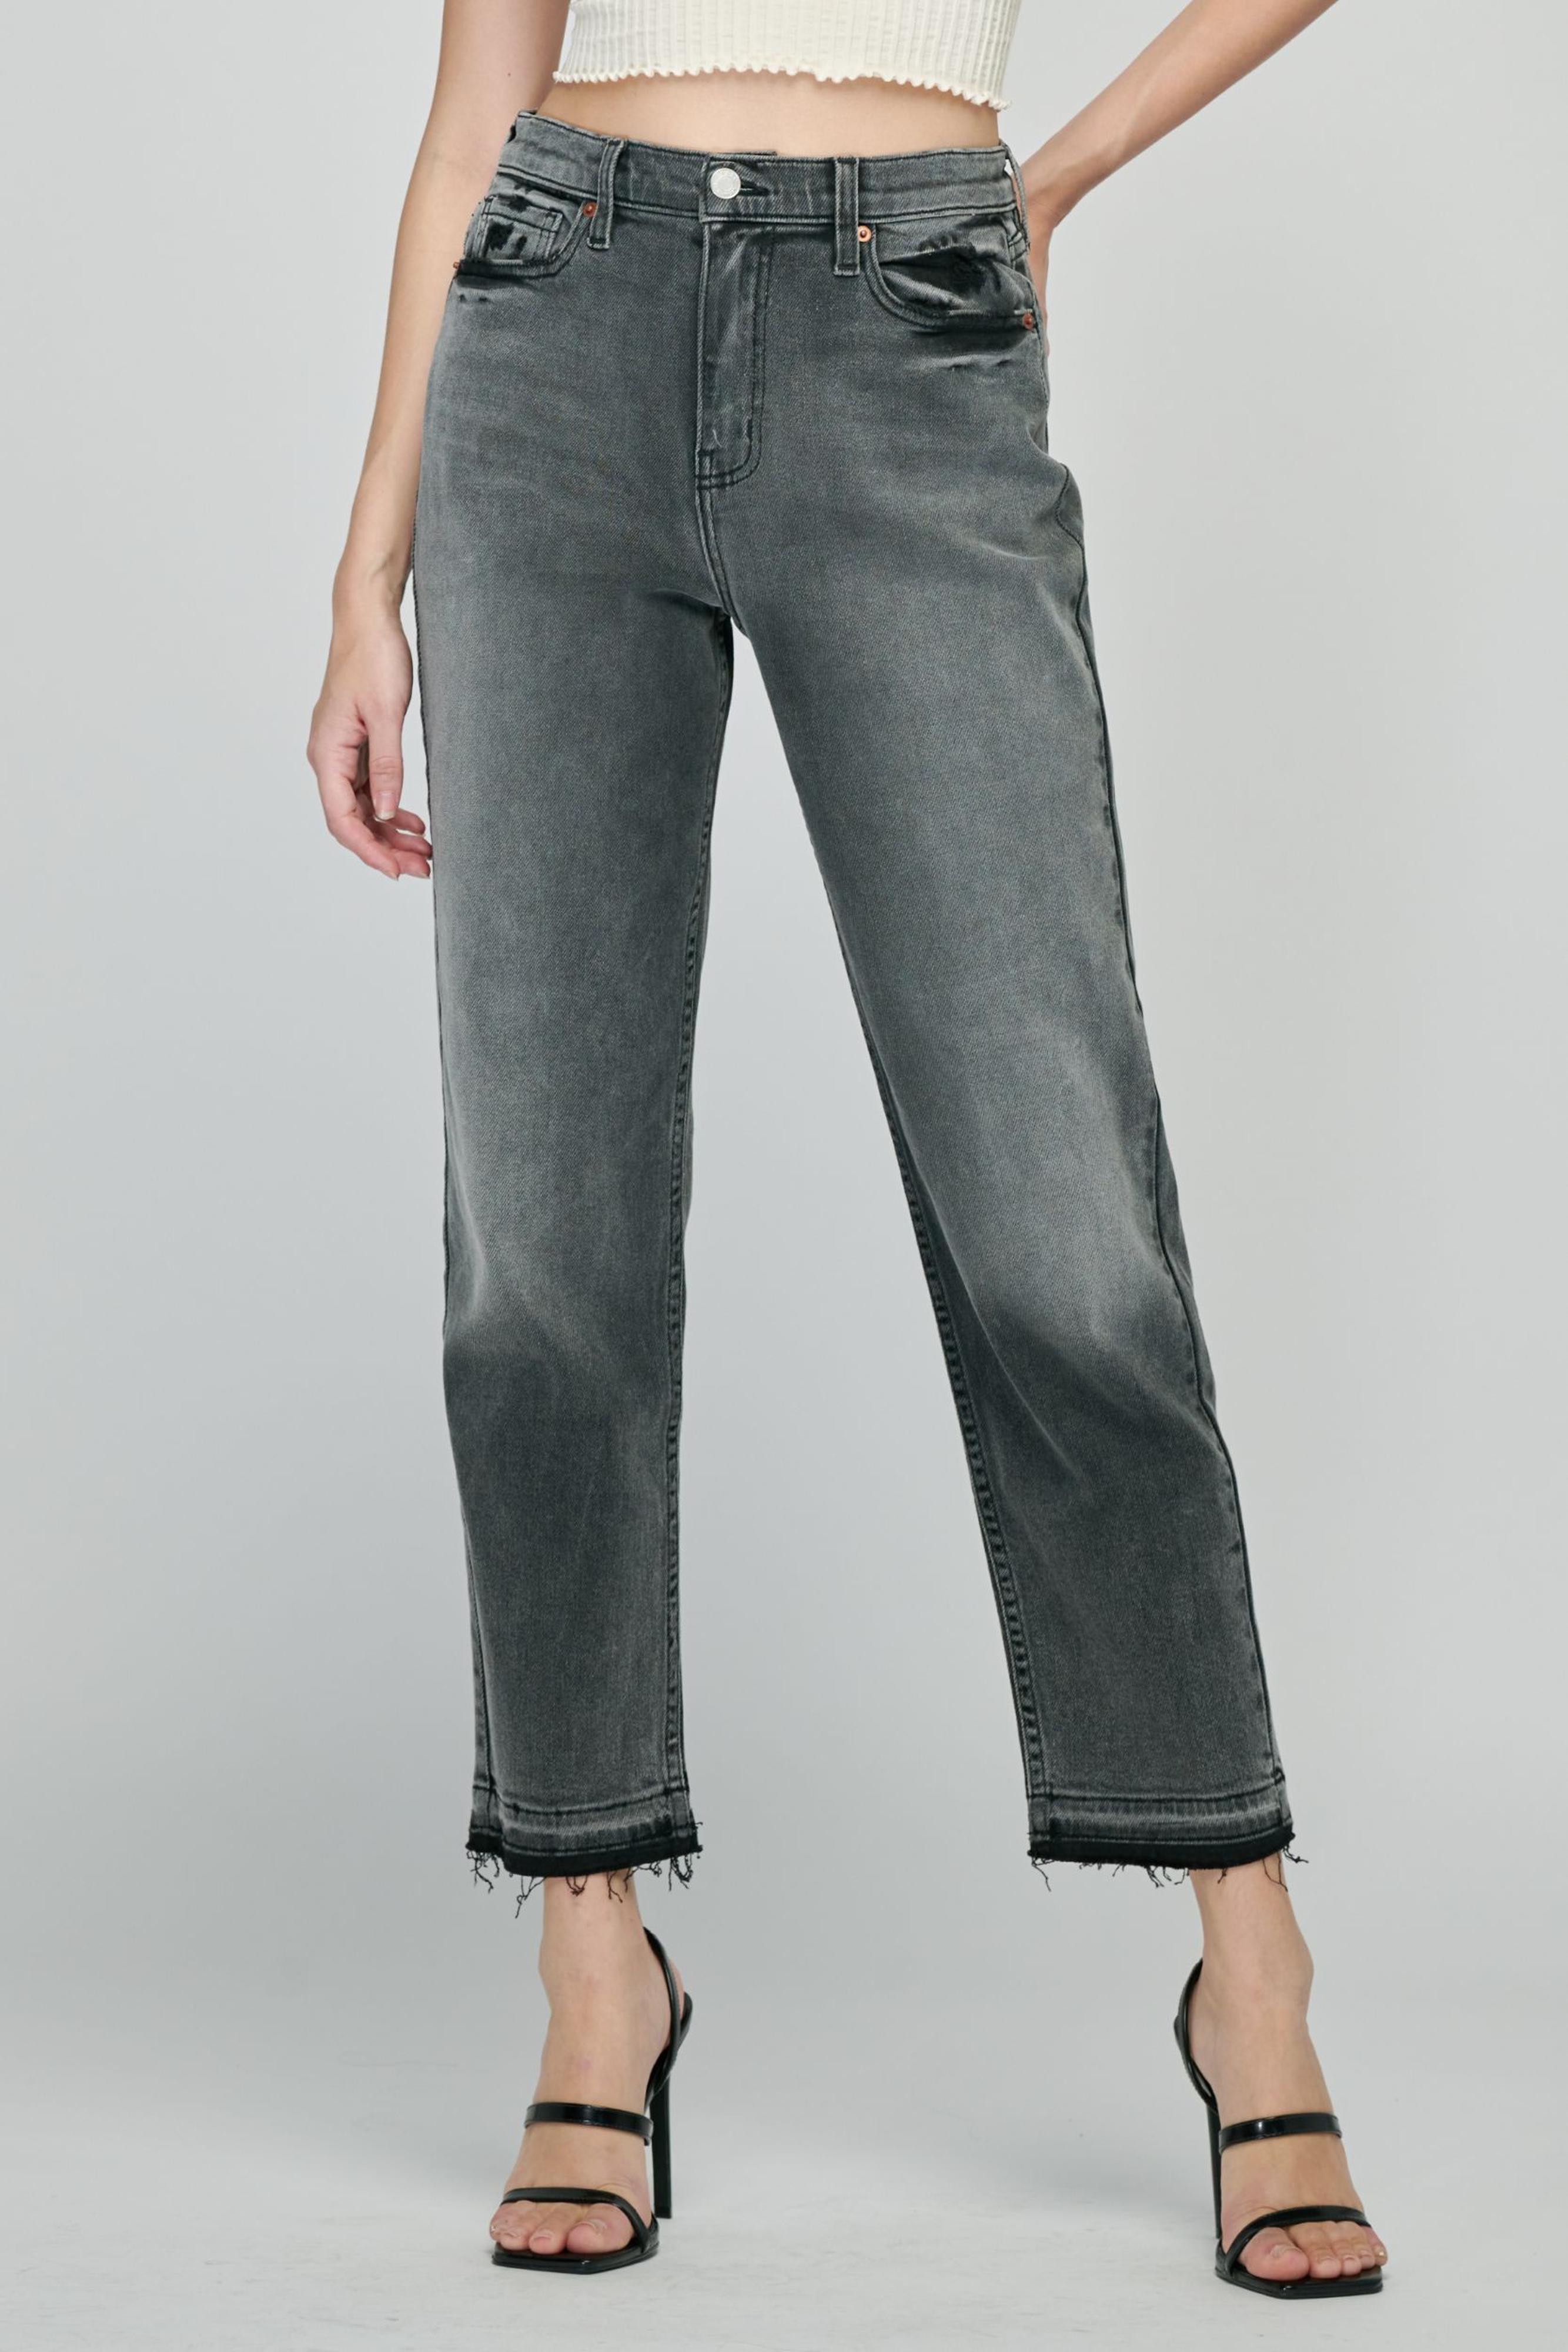  The Ally High Rise Mom Jean